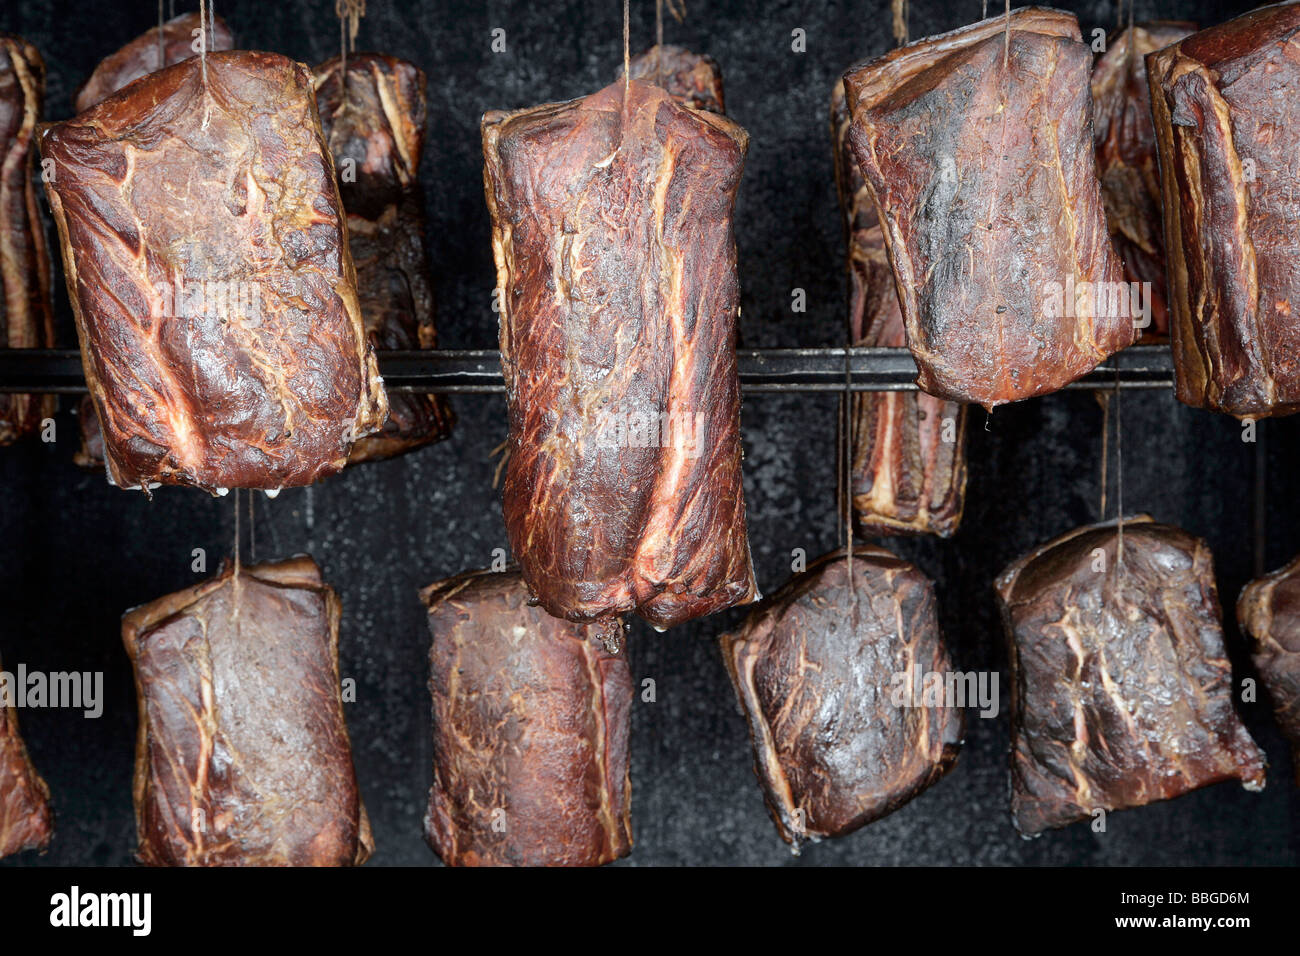 Smoked pork joints in a smoker, production of the bavarian specialty Schwarzgeraeuchertes, smoked ham in a butchery in Hengersb Stock Photo